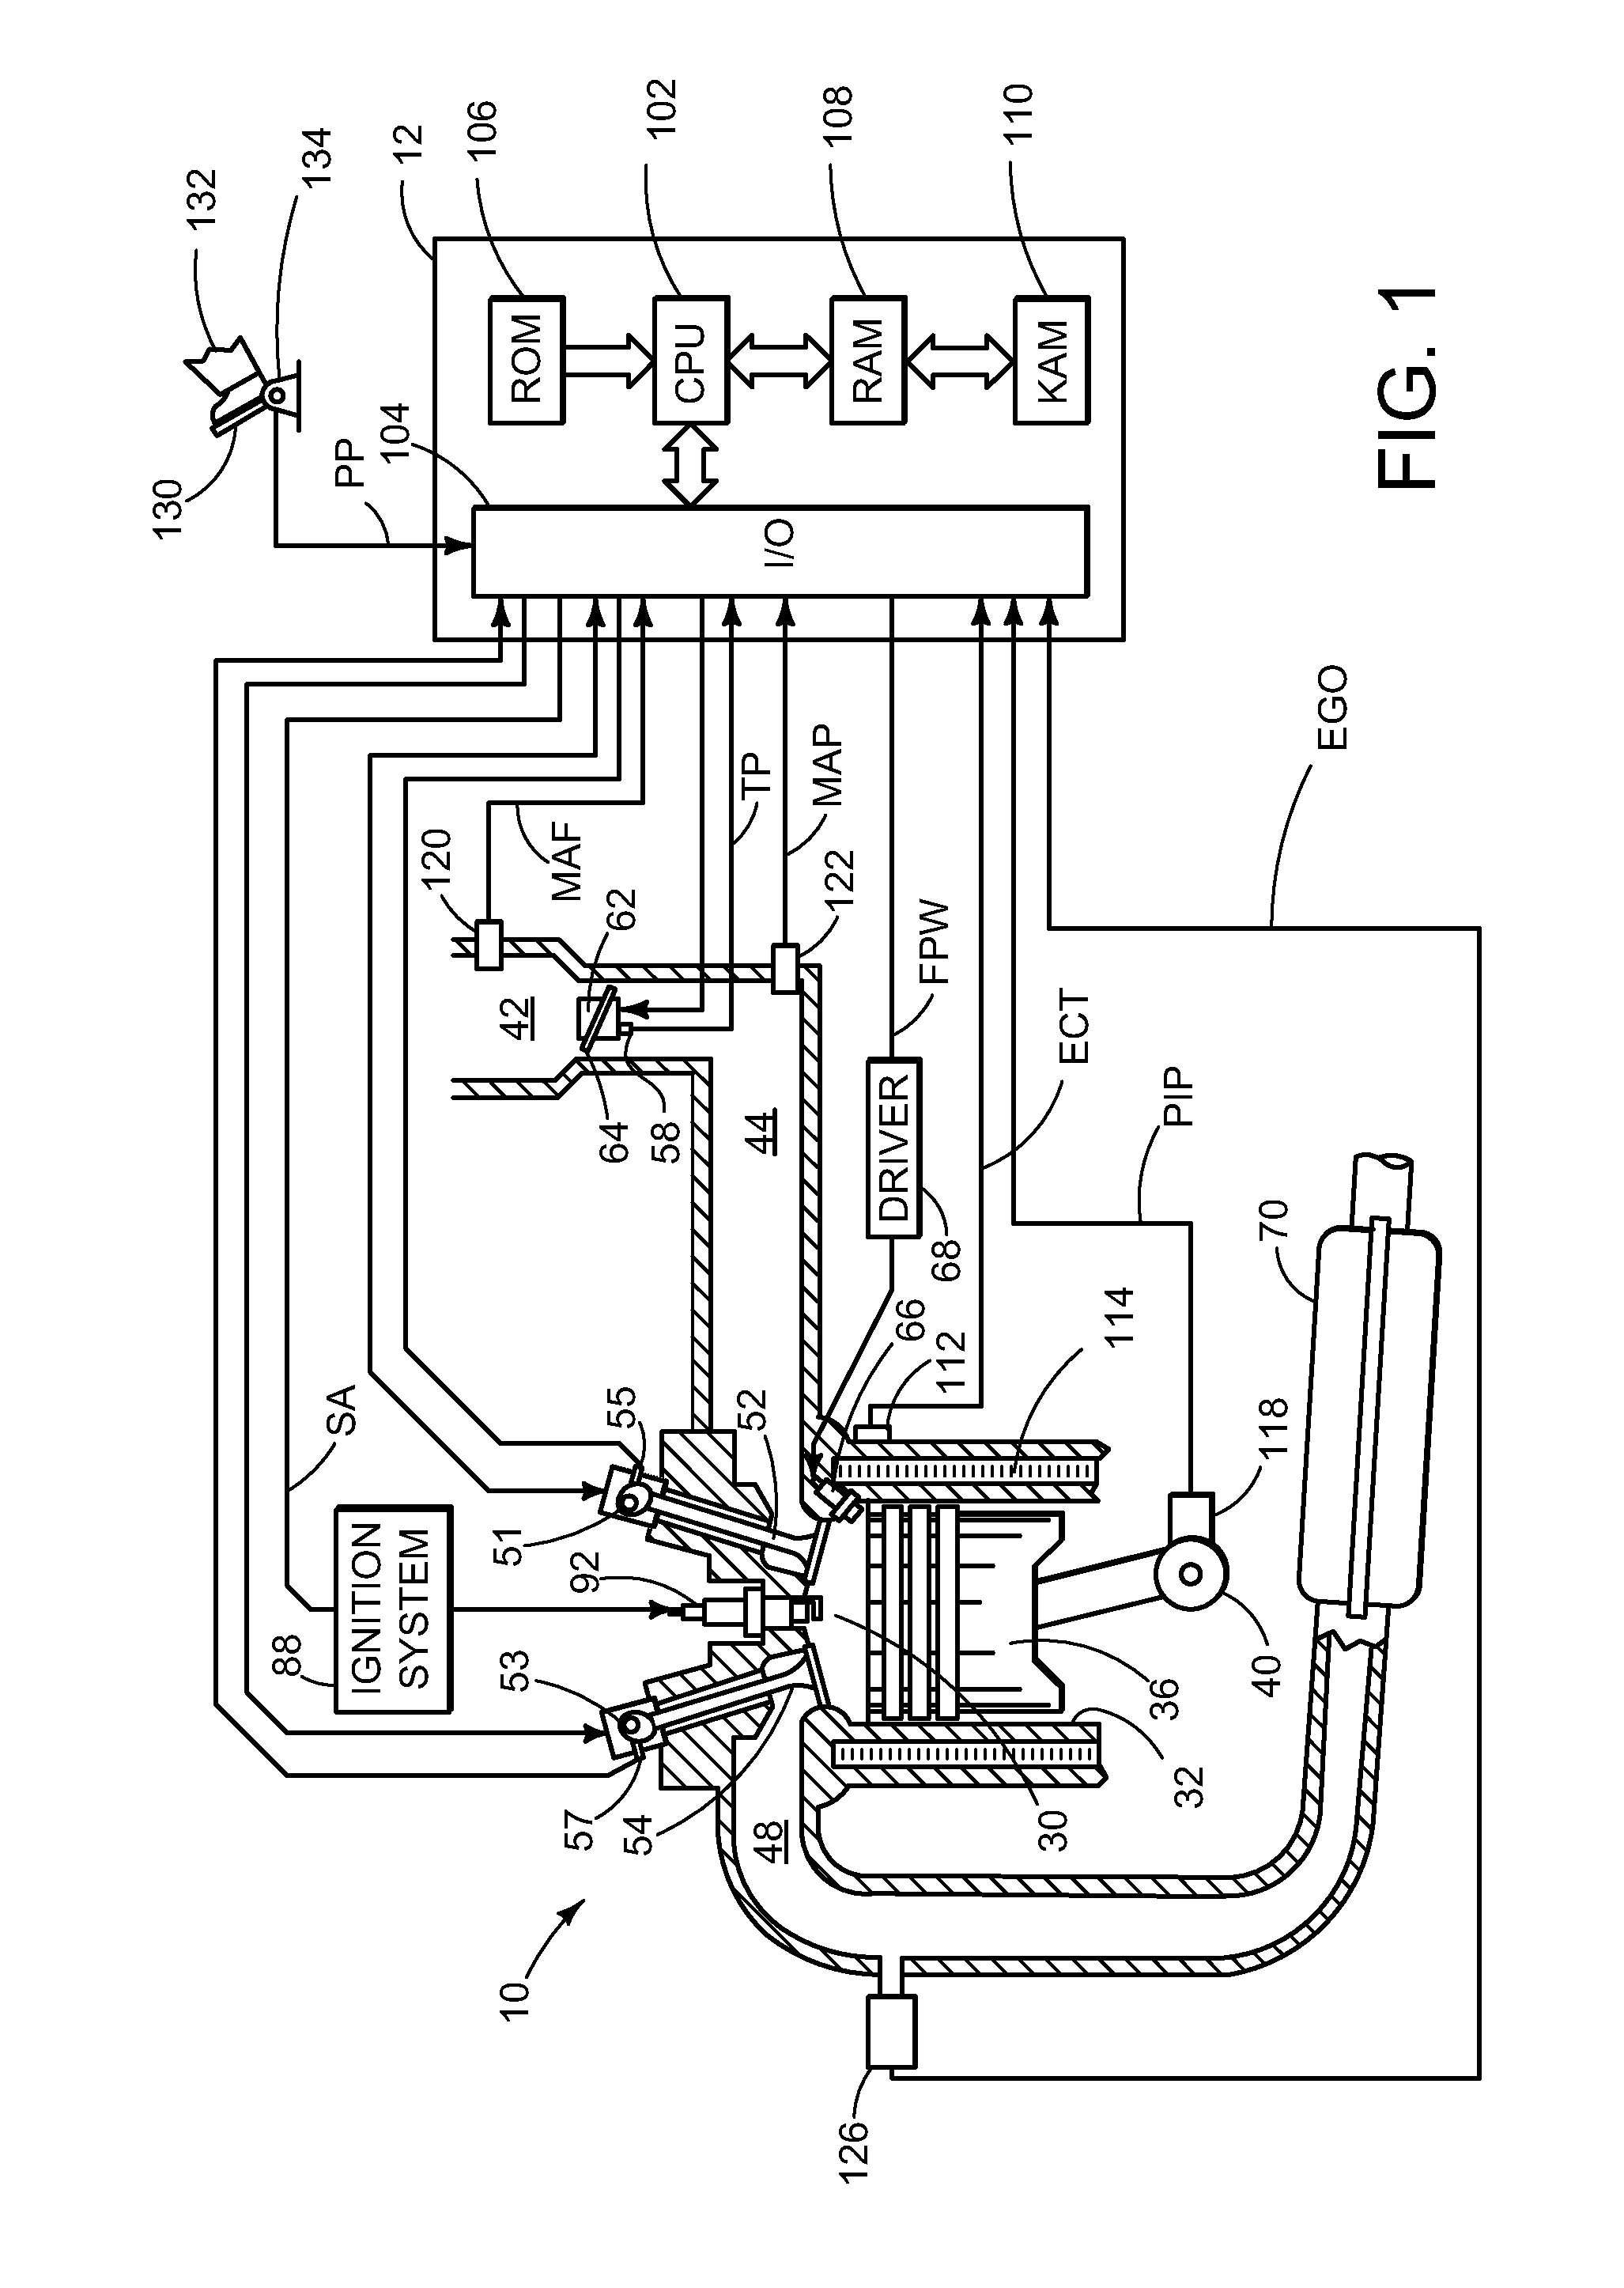 System and method for injecting fuel to a gaseous fueled engine